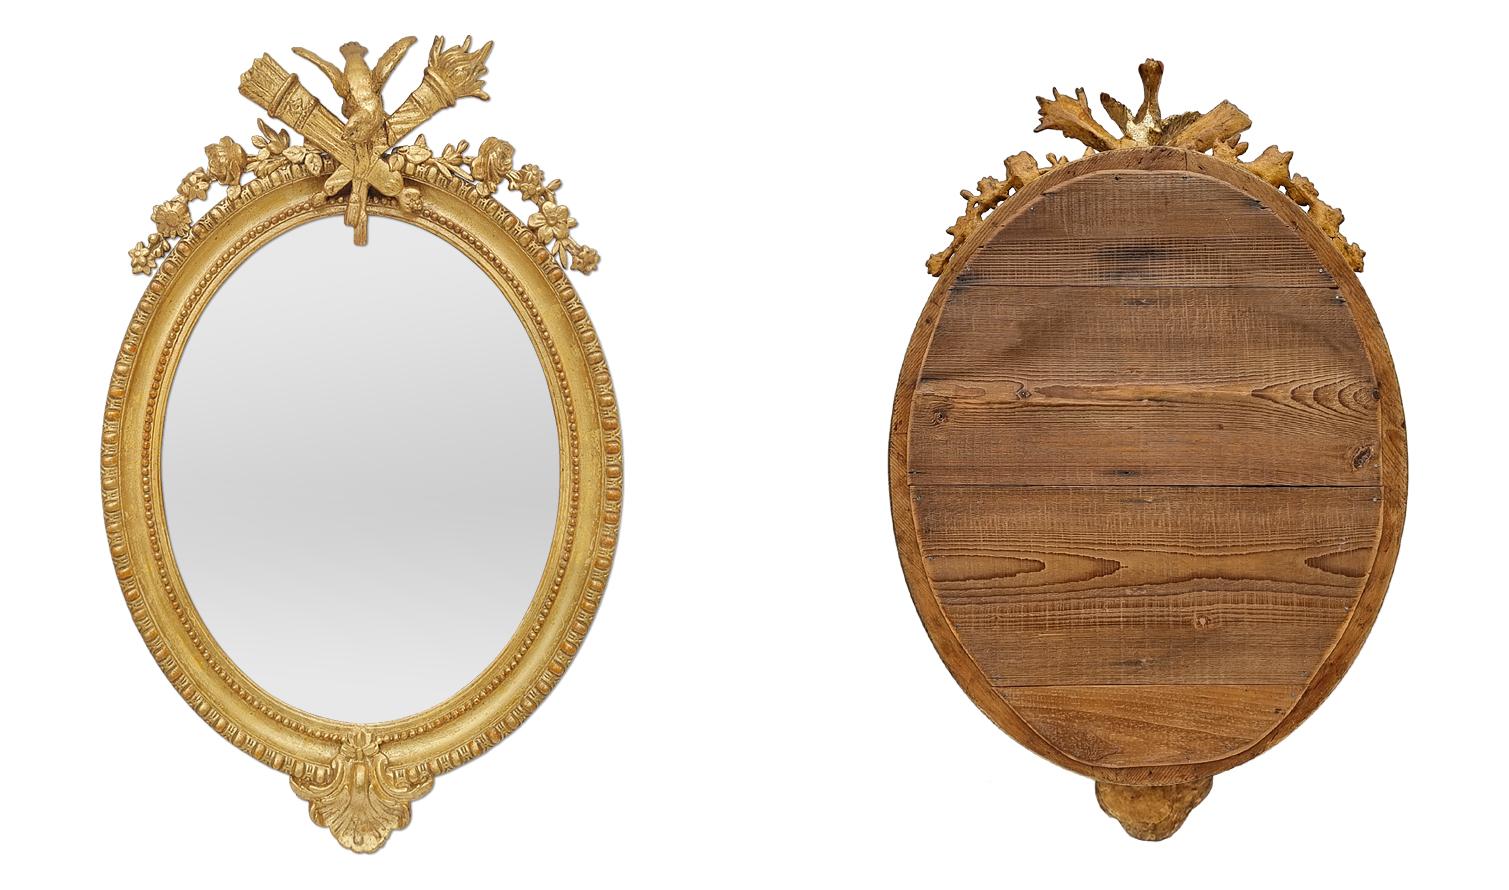 Rare Antique French Giltwood Oval Mirror With Pediment, circa 1890 For Sale 1